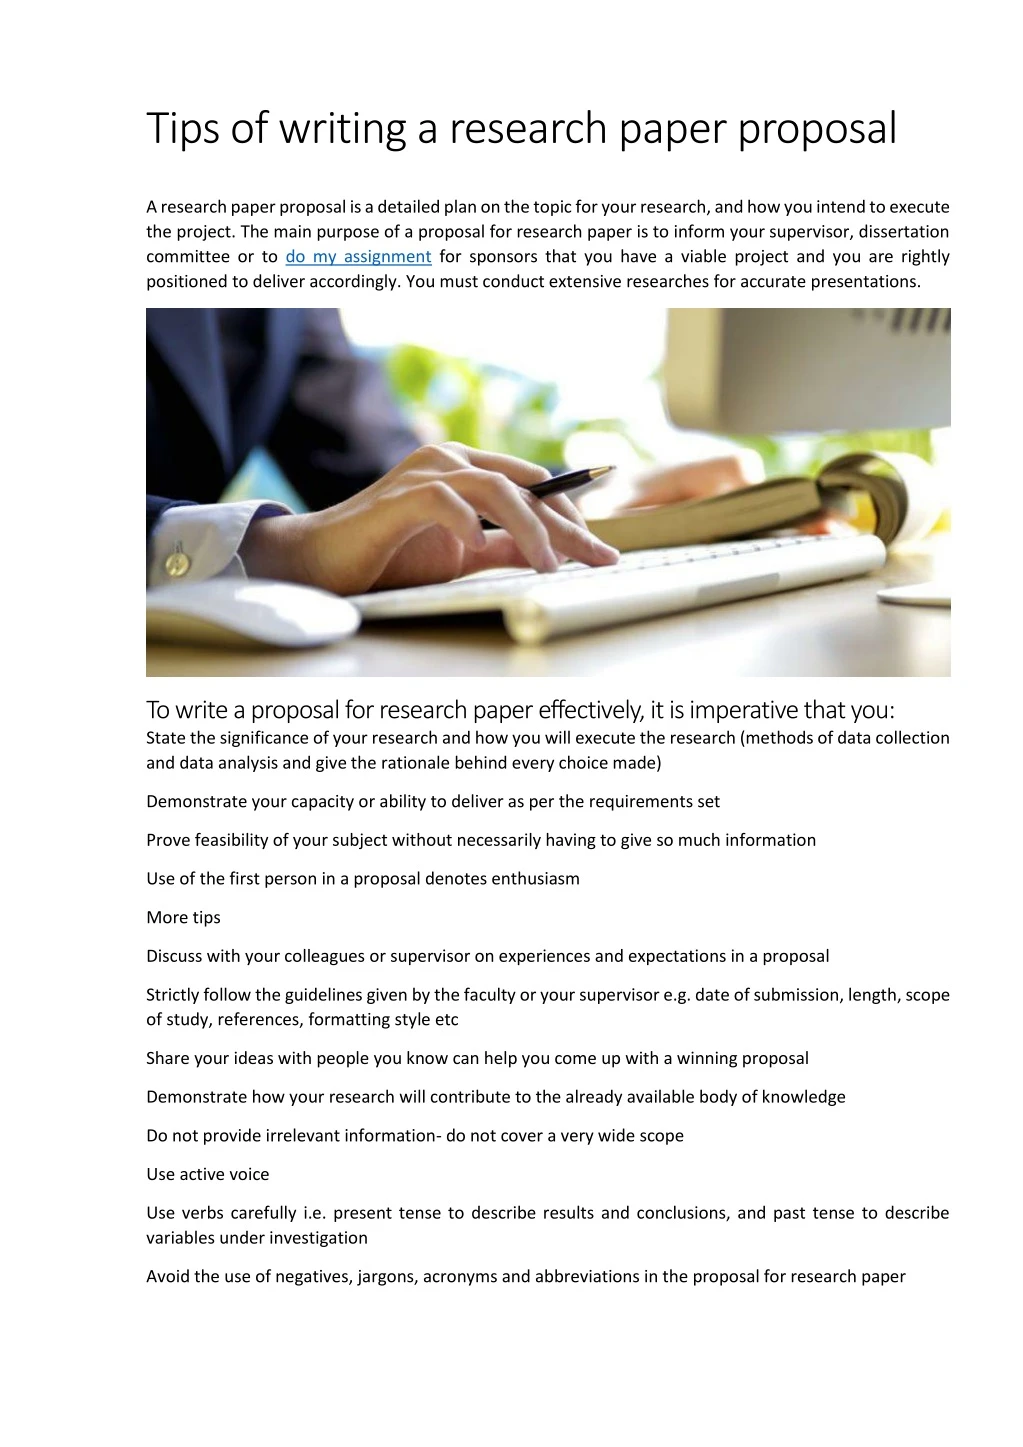 tips of writing a research paper proposal